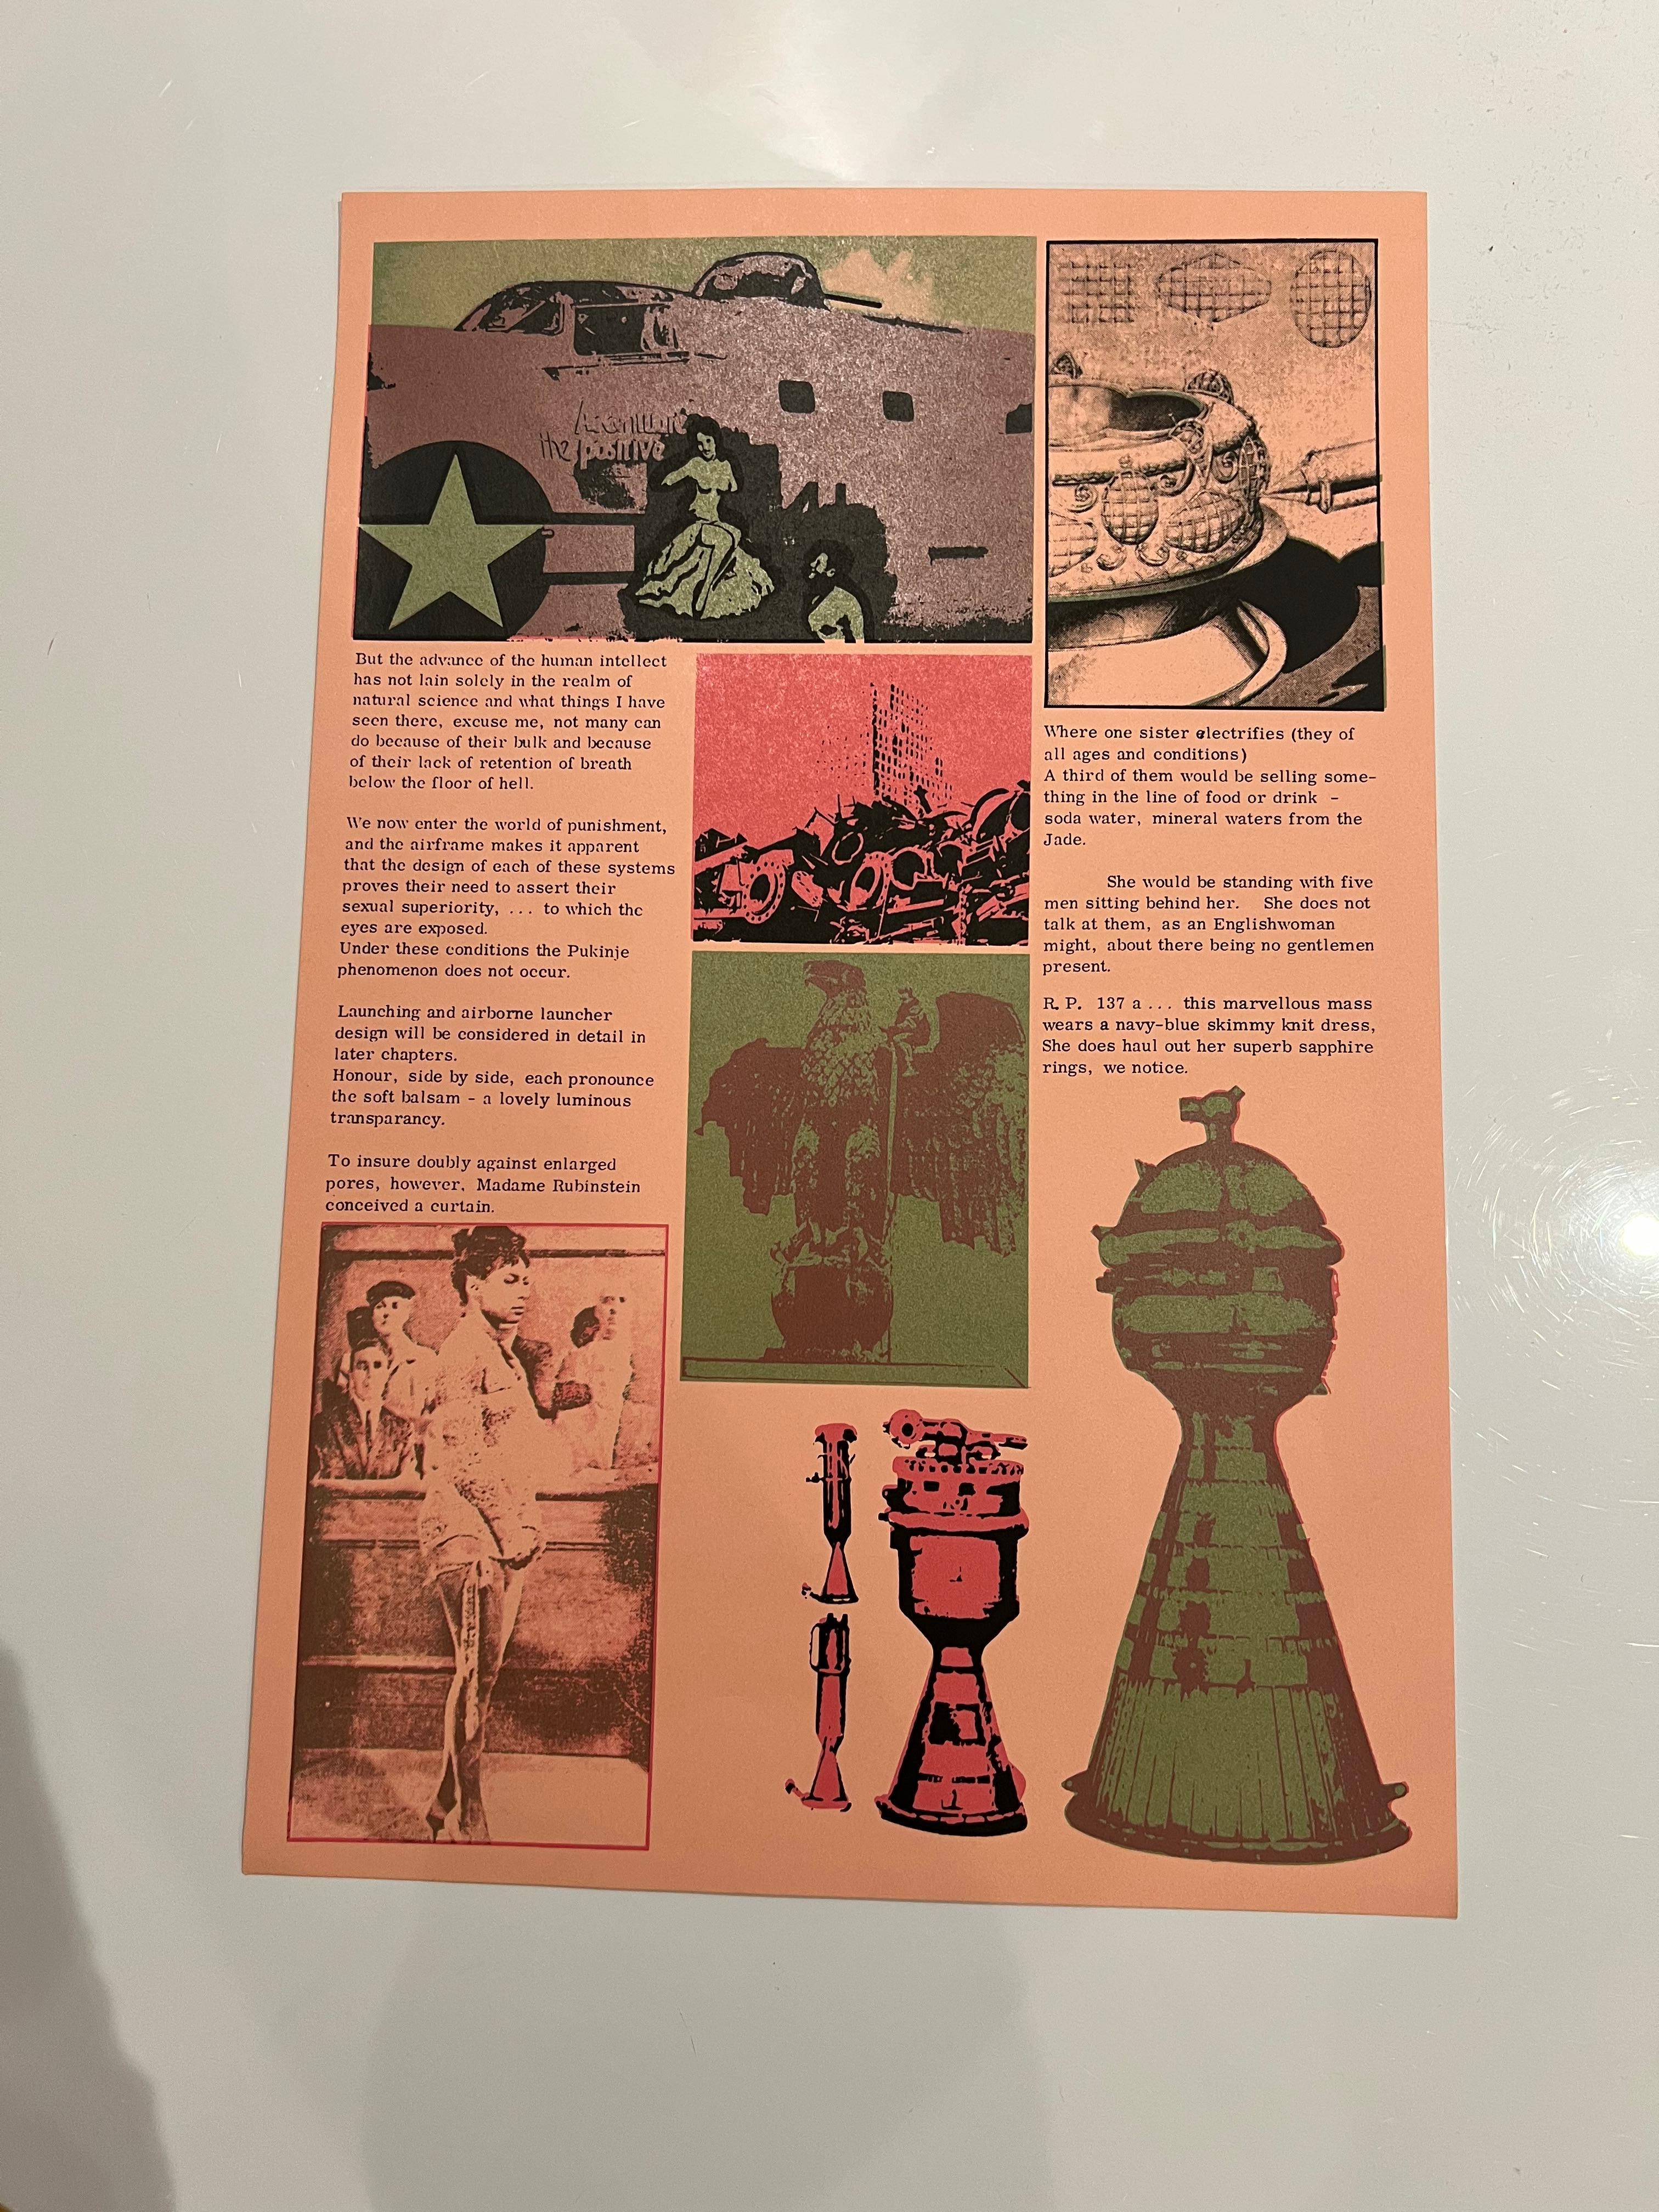 Human Intellect - Moonstrips Empire News 1967

By Eduardo Paolozzi

Eduardo Paolozzi (1924-2005) was a pioneering Scottish artist and sculptor associated with the Pop Art movement. Renowned for his collage works, he skillfully blended elements of